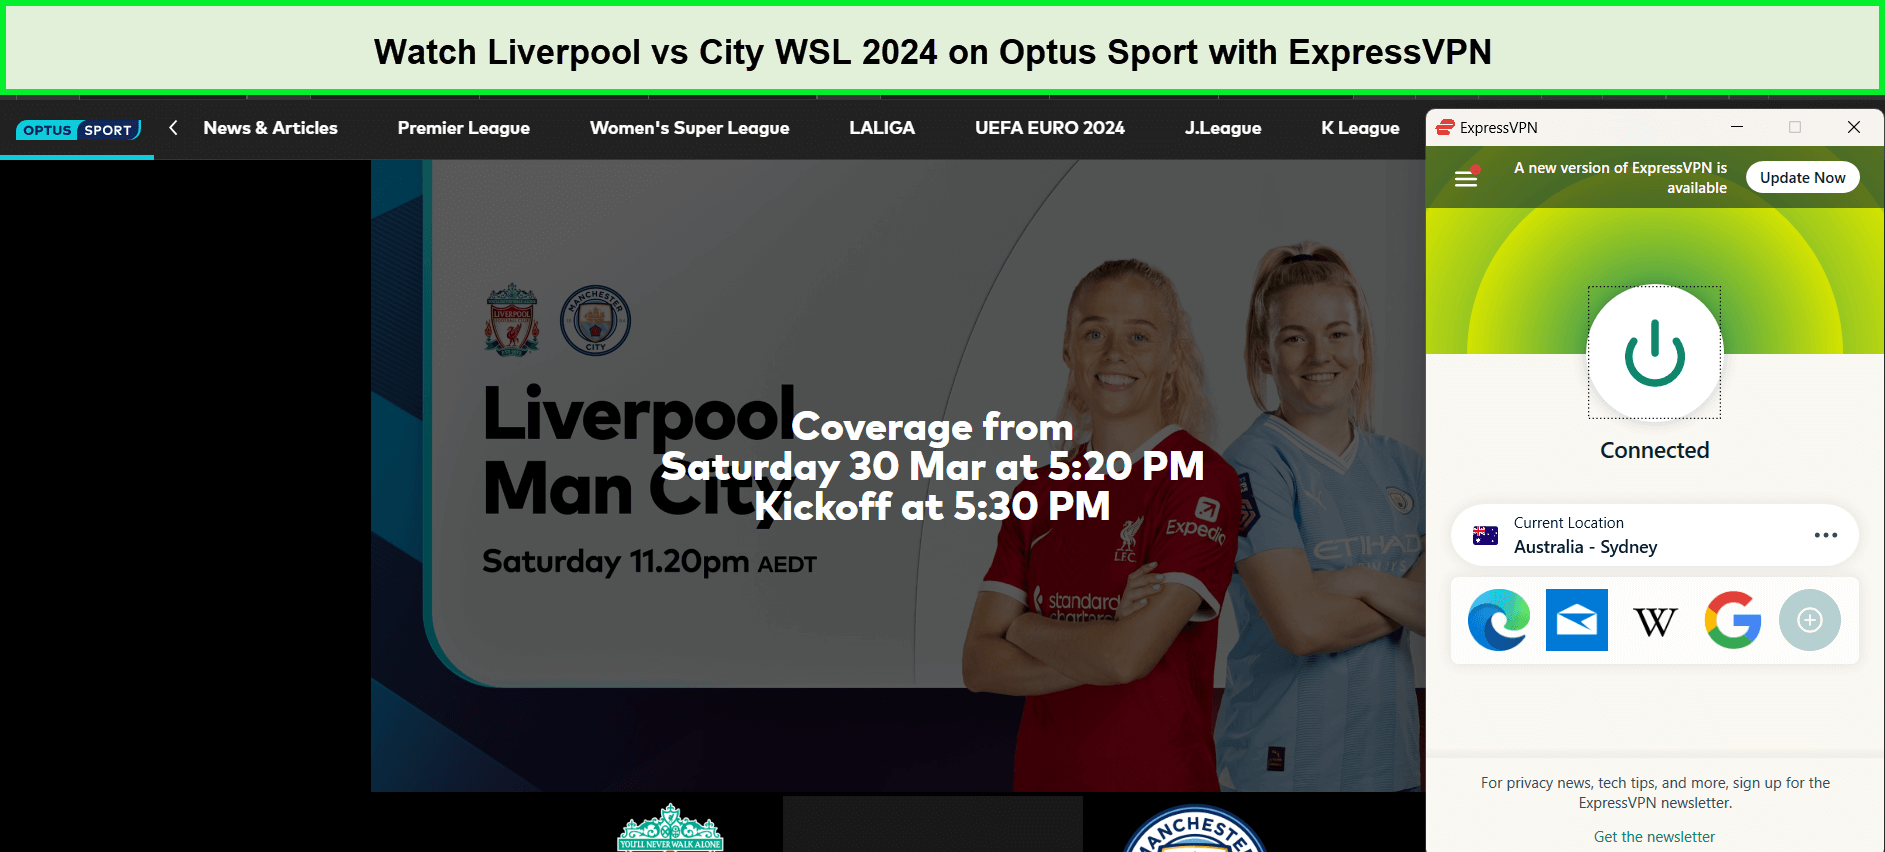 watch-Liverpool-vs-City-WSL-2024-in-Germany-on-Optus-Sport-with-expressvpn